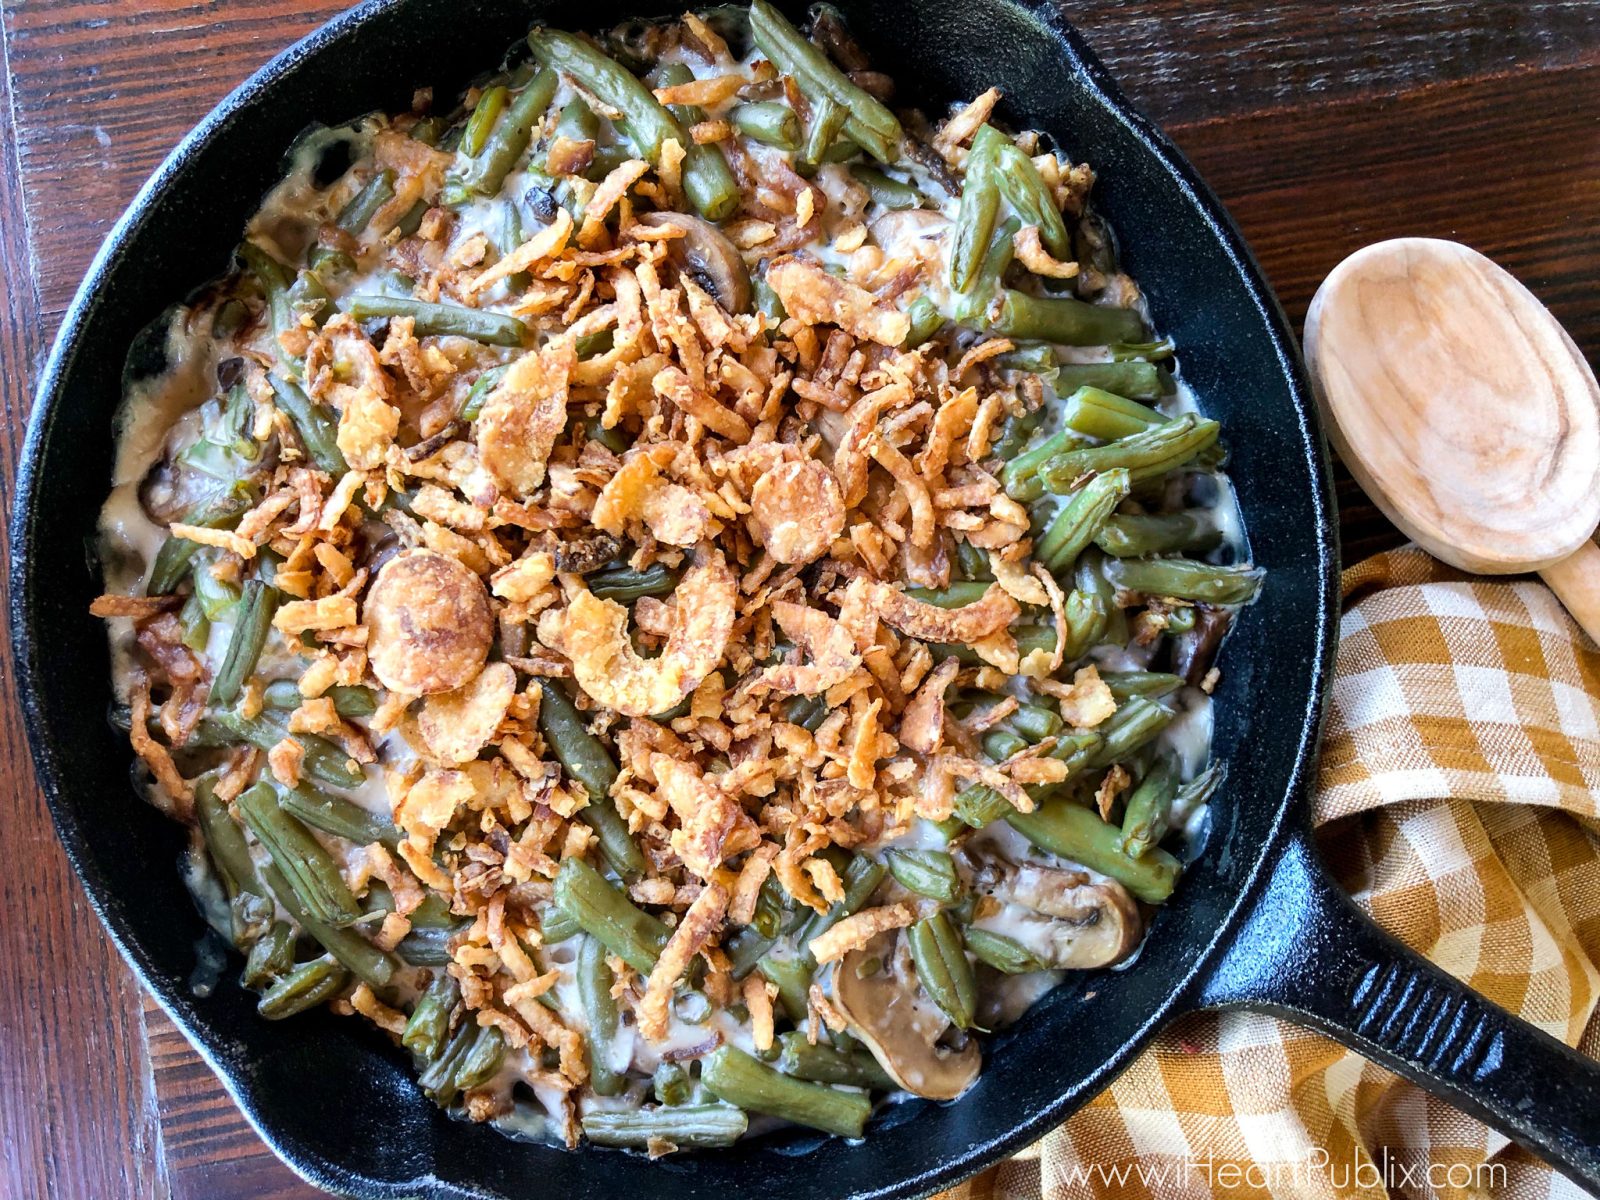 Save On Green Giant Vegetables & Serve Up This Traditional Green Bean ...